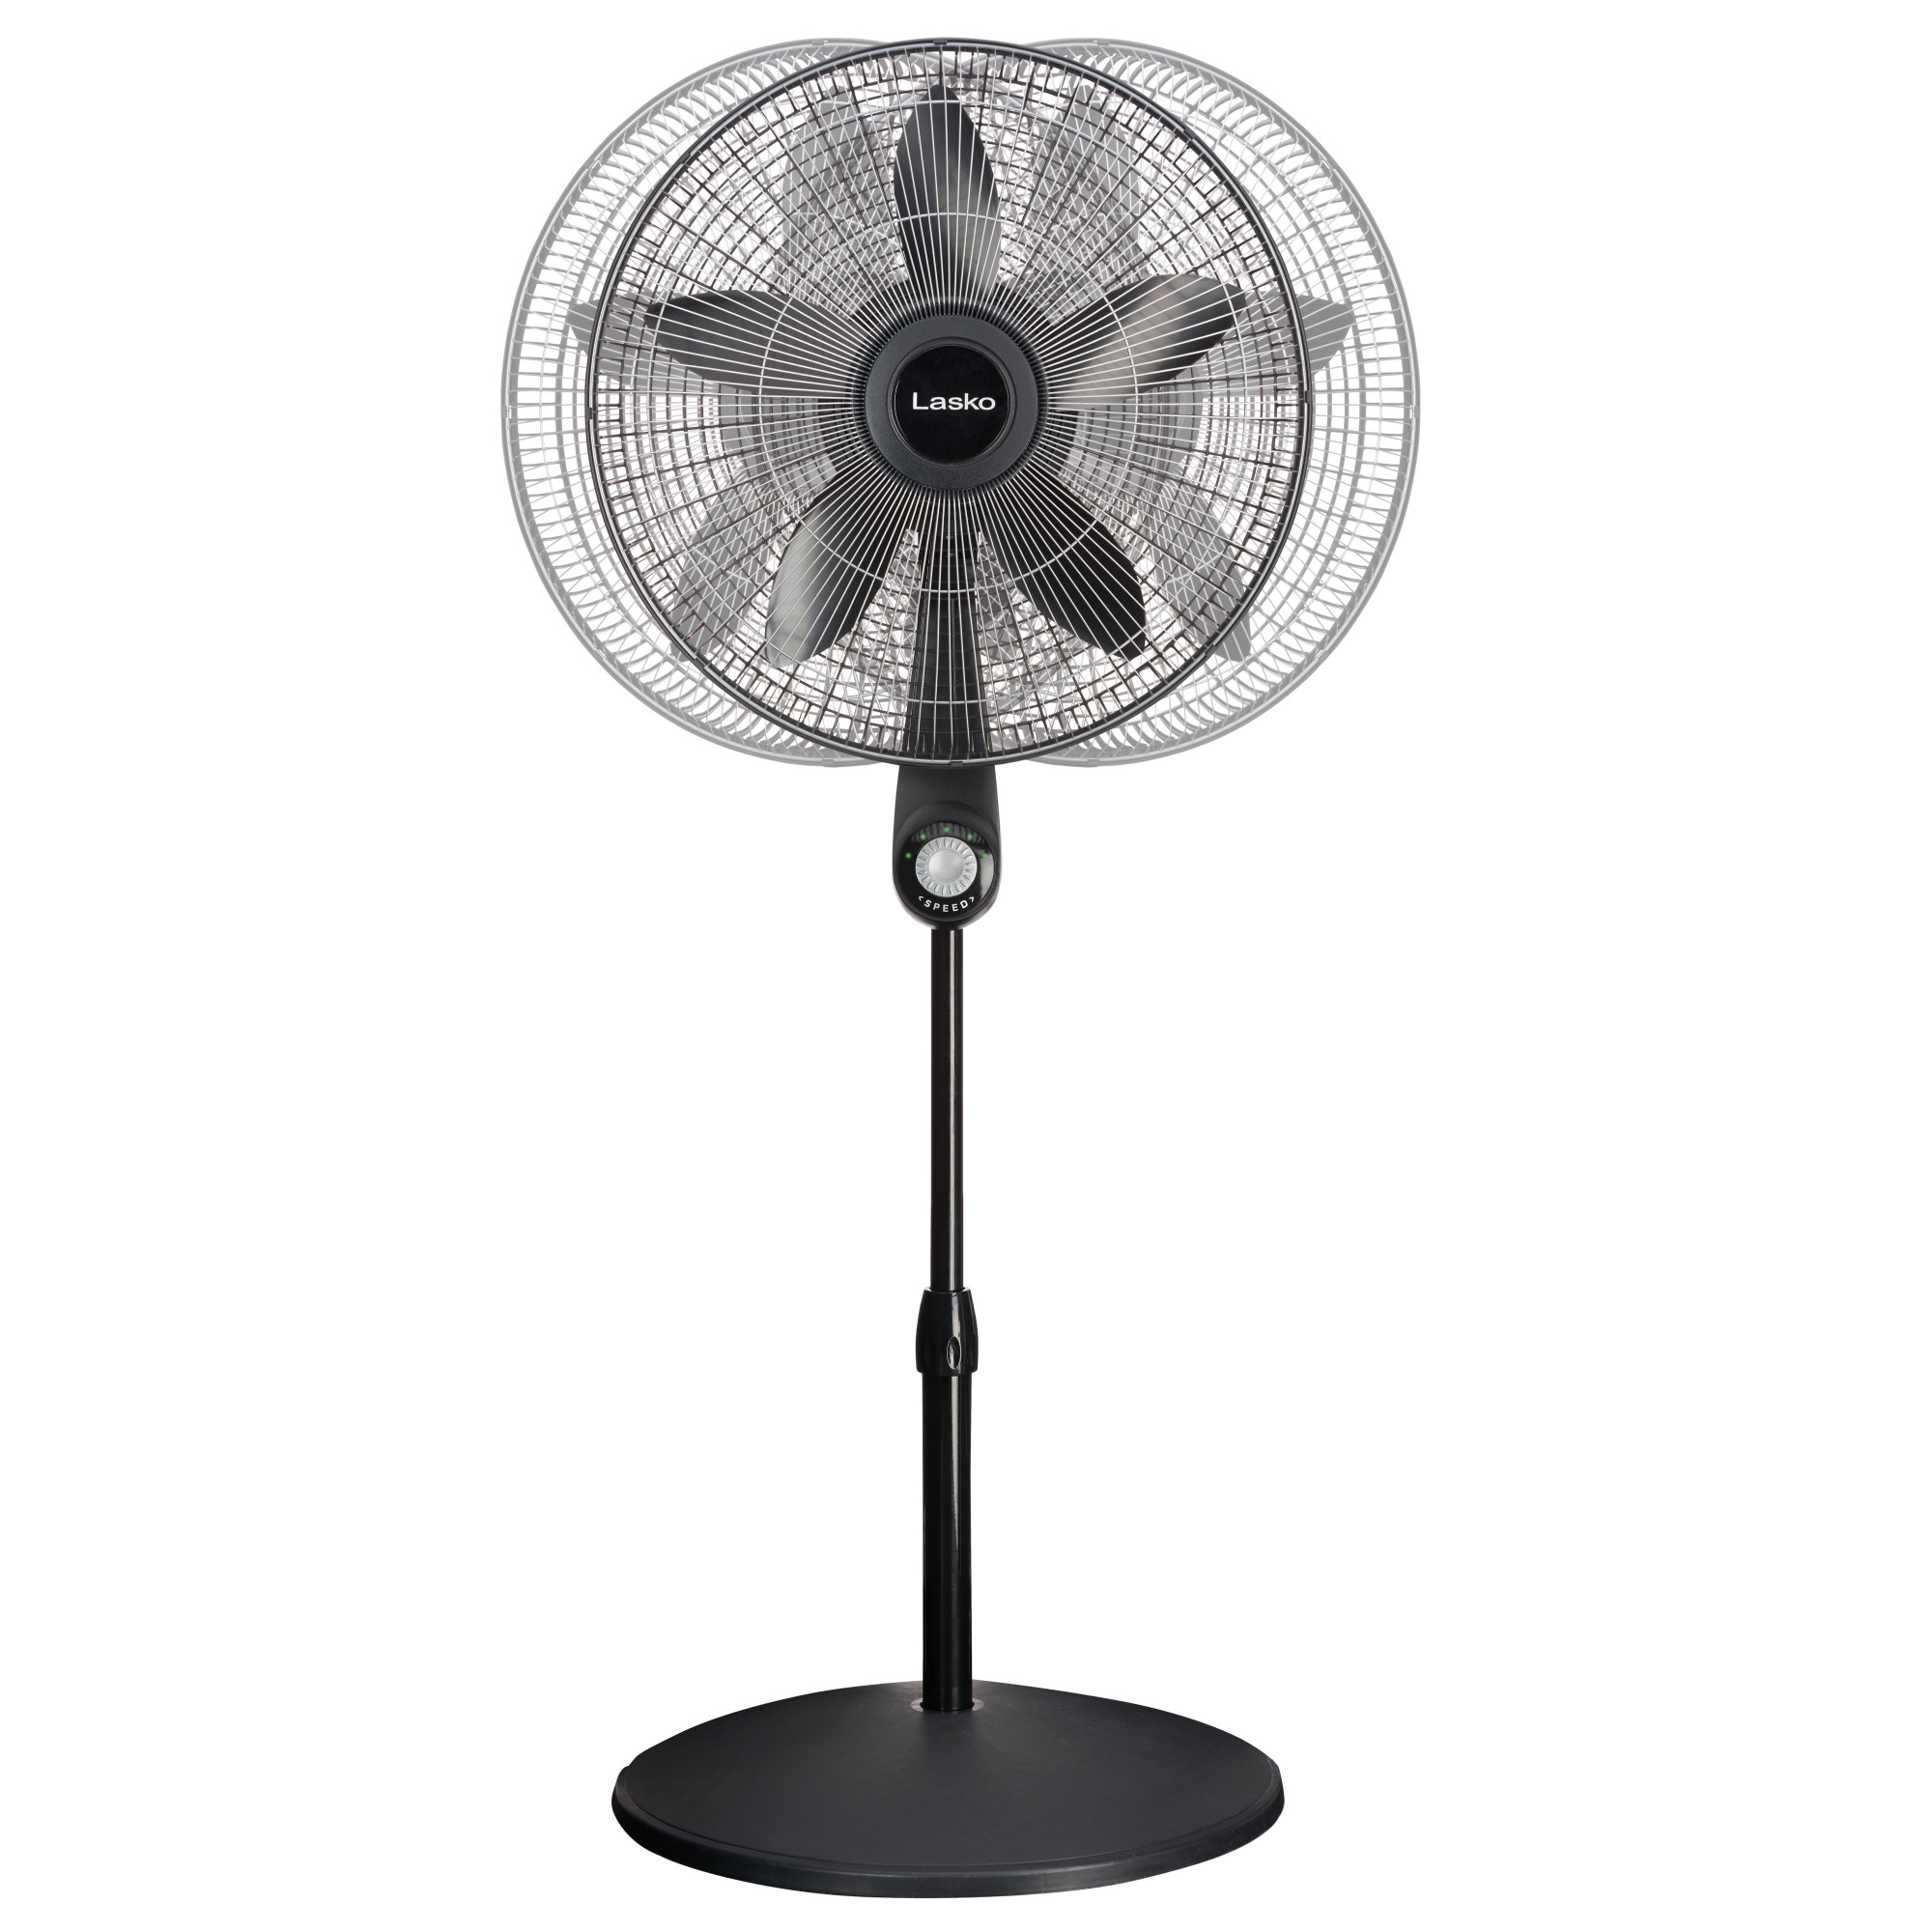 Lasko 18" 5-Speed High Performance Pedestal Fan with Remote, 54" H, Black, S18602, New - image 5 of 7